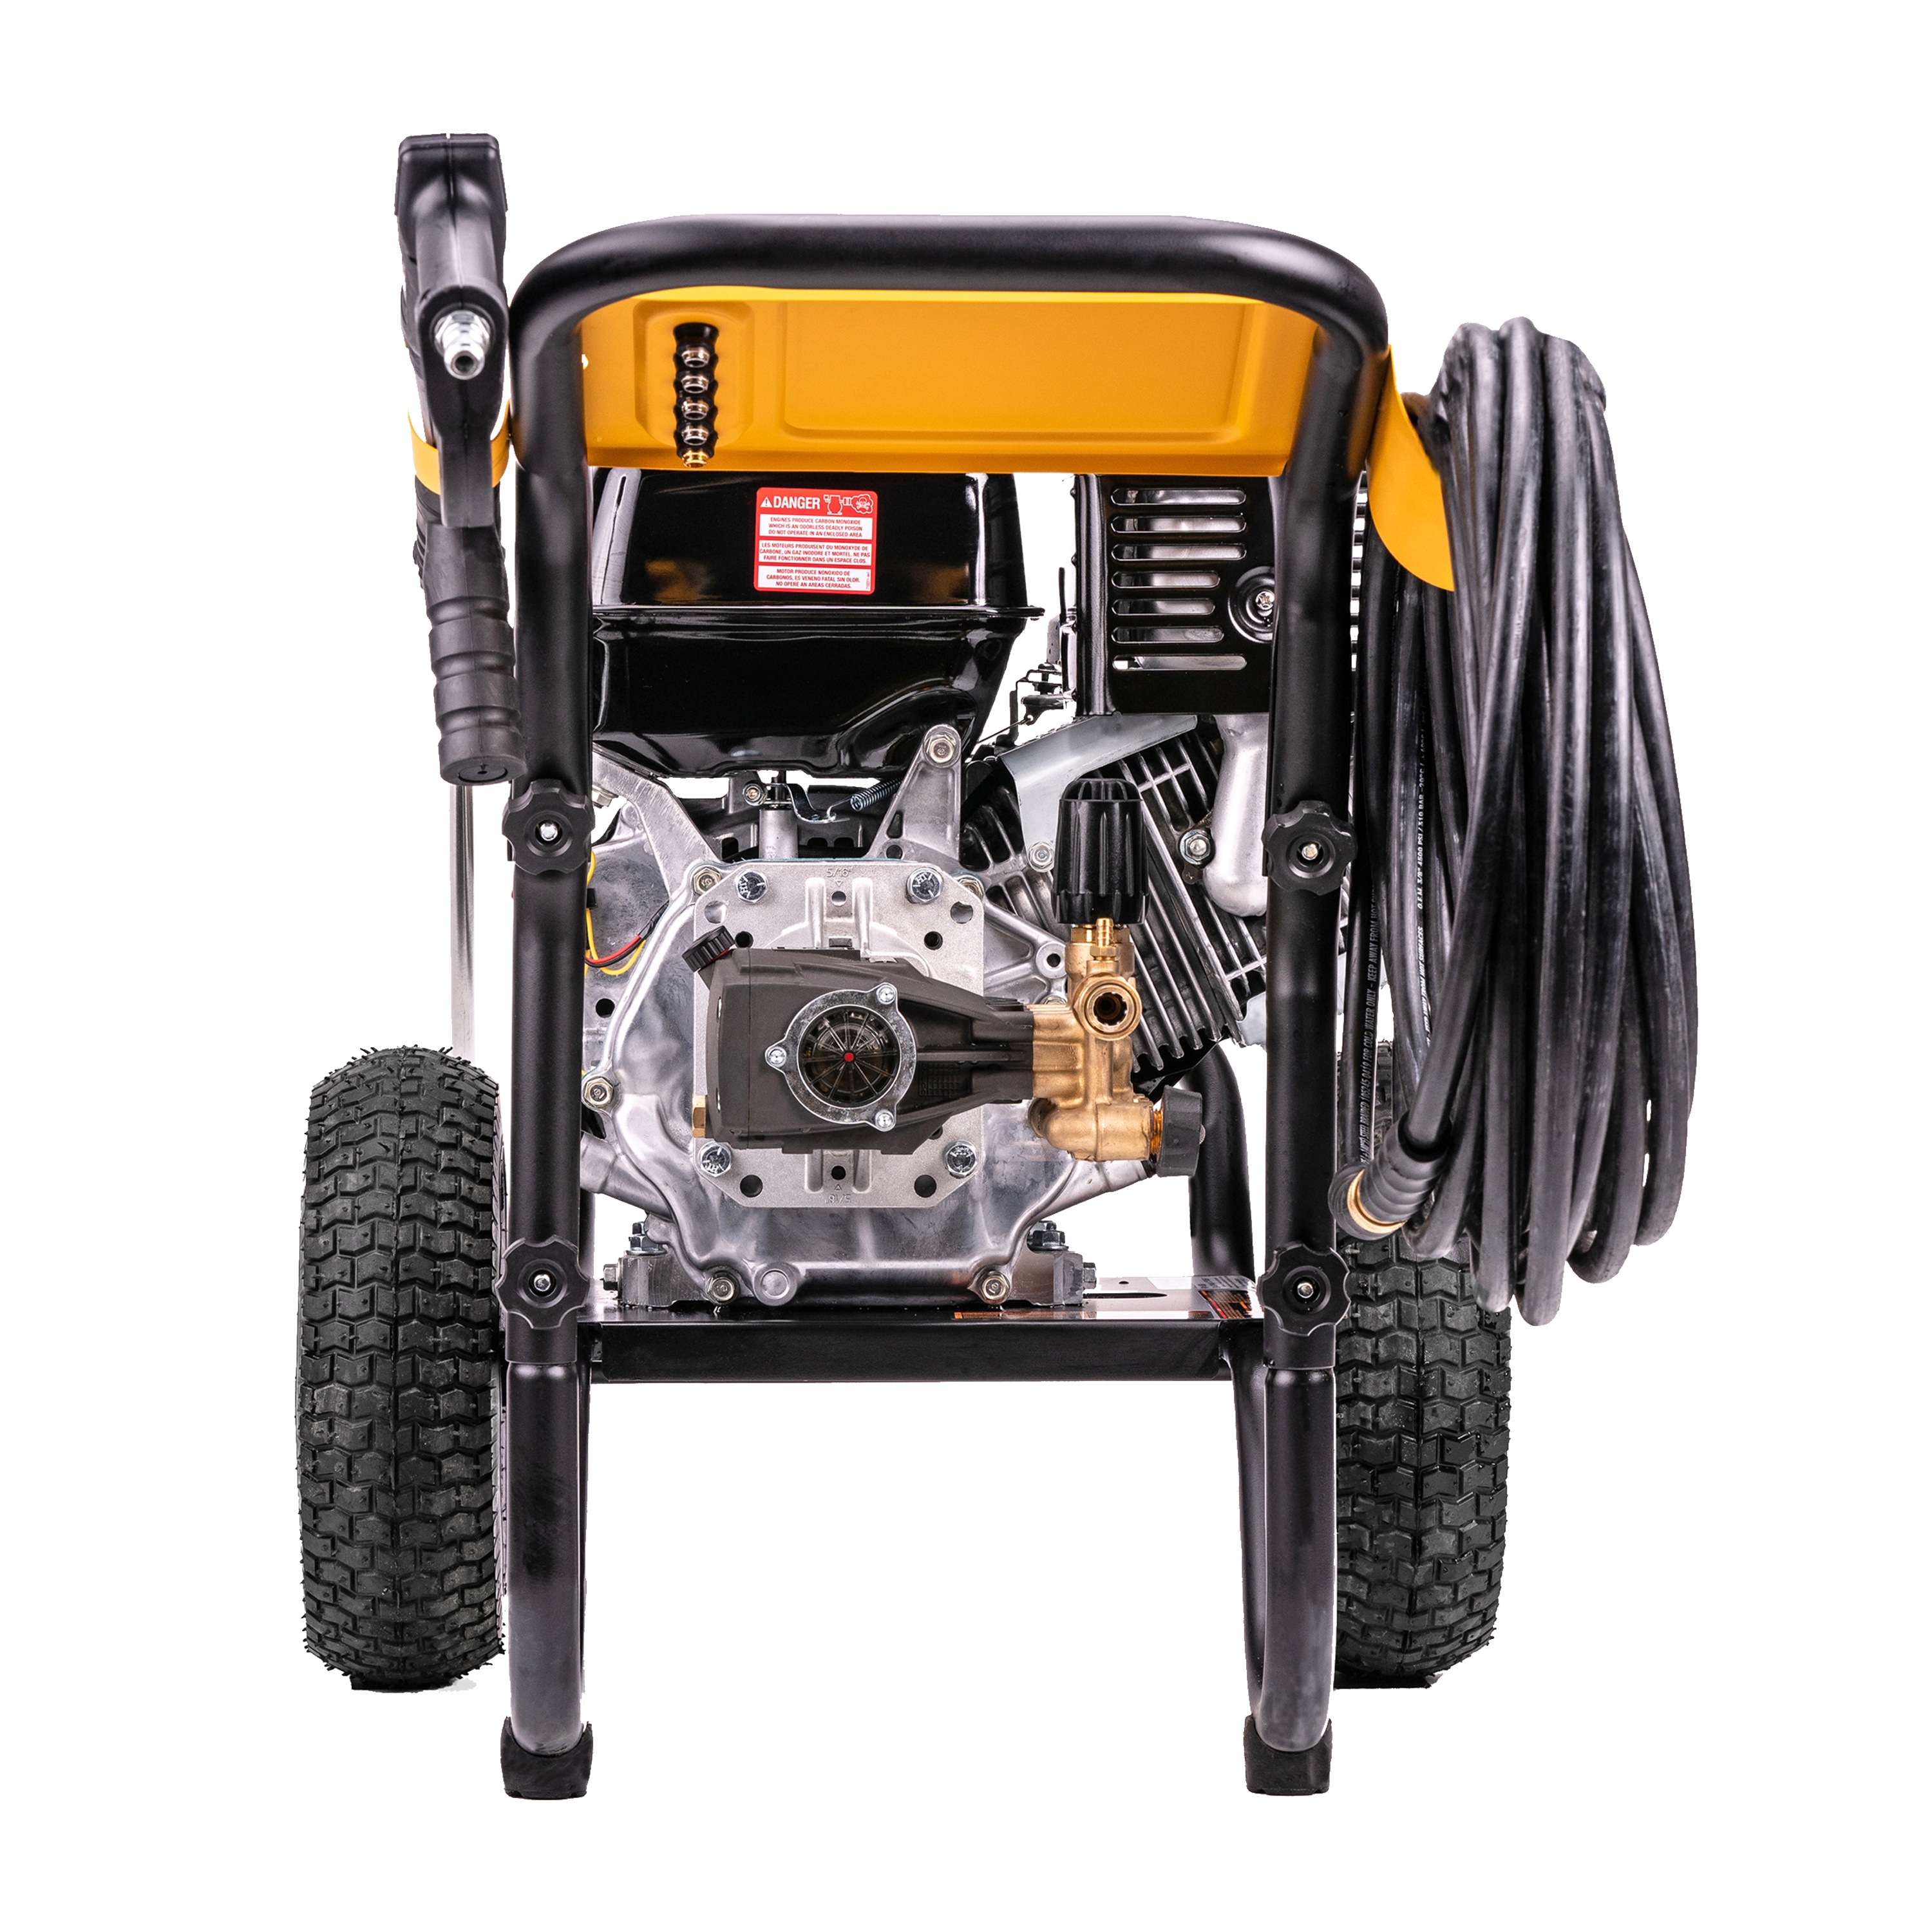 DEWALT - 4400 PSI at 40 GPM Cold Water Gas Pressure Washer Powered by Honda with AAA Triplex Pump - DXPW4440